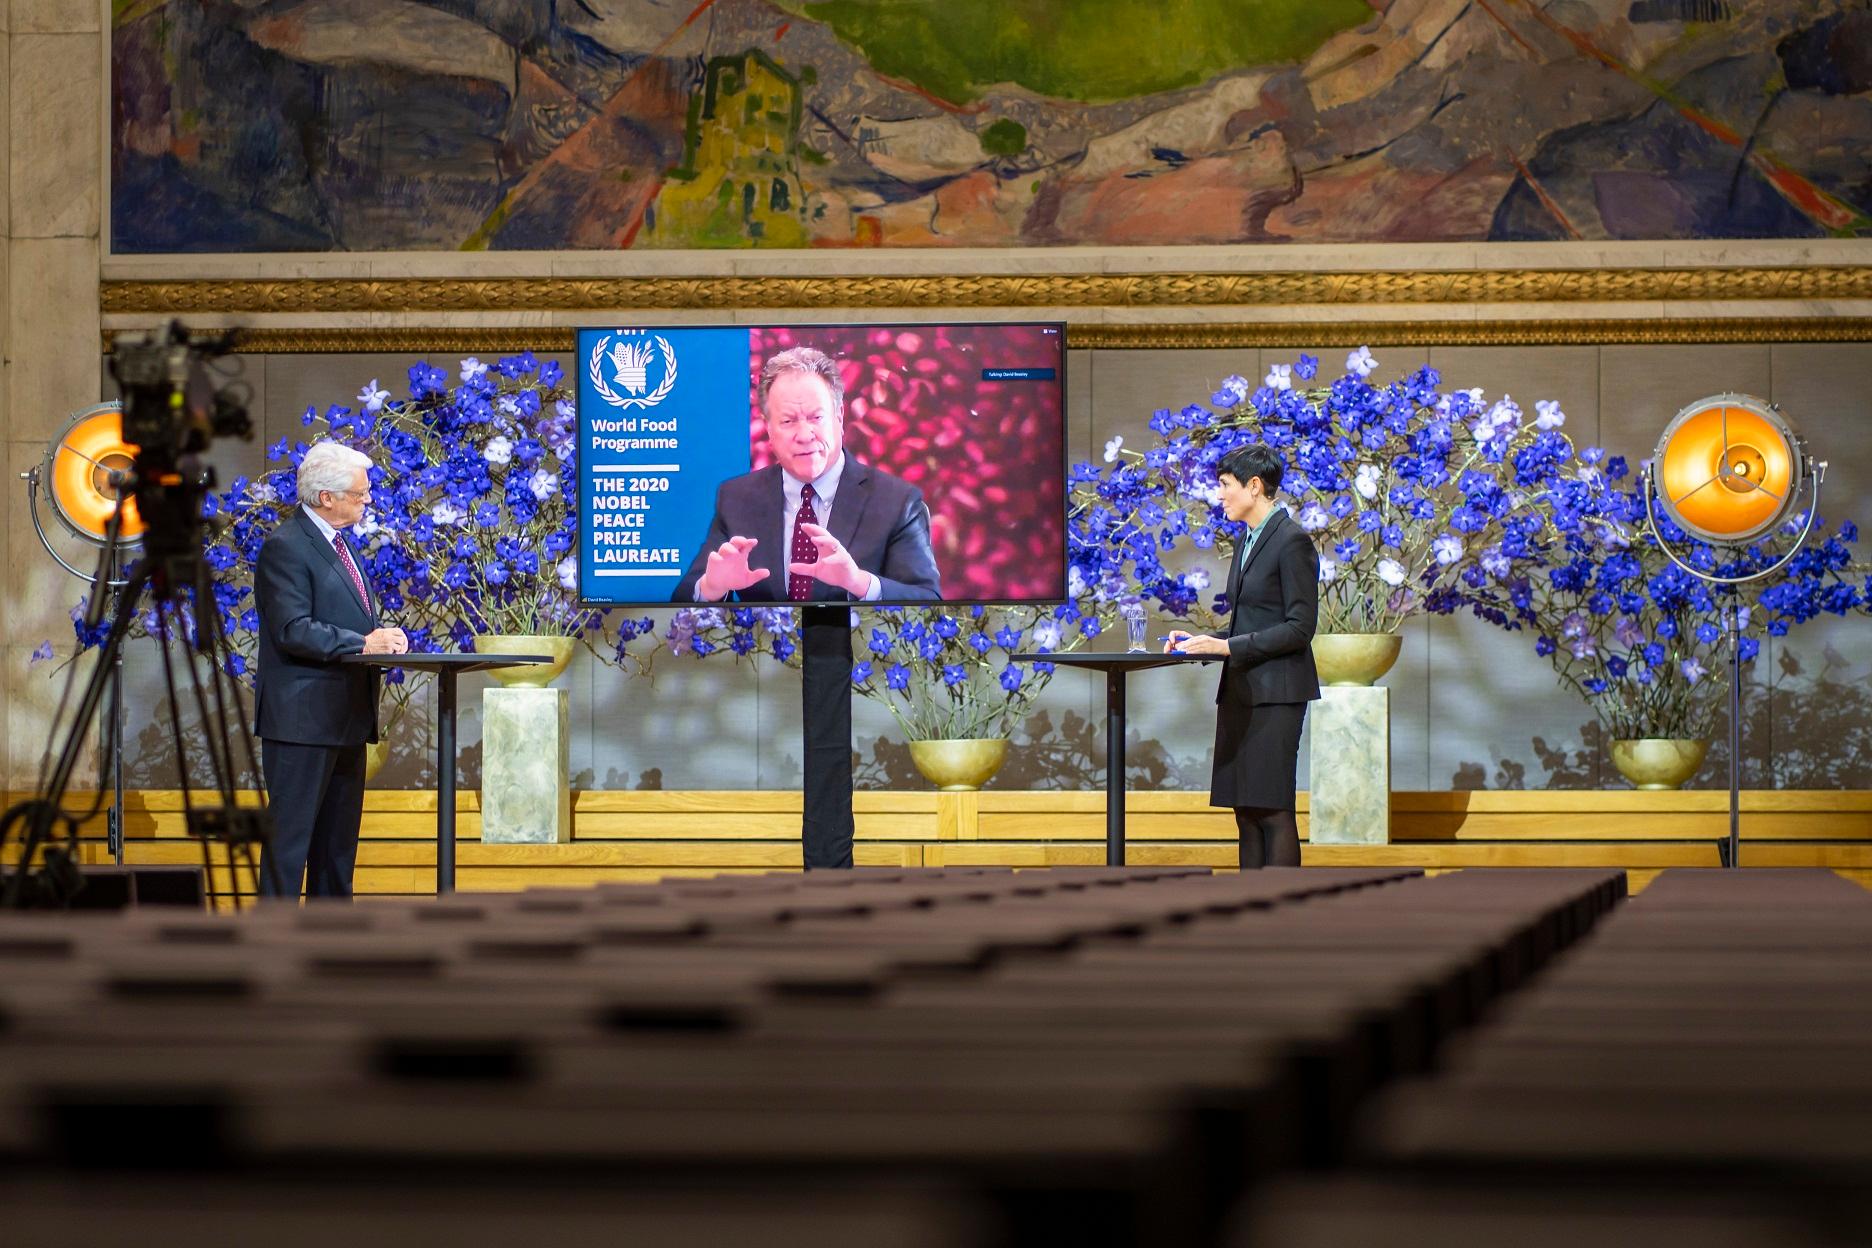 This year's Nobel Peace Prize laureates, CEO of the World Food Program WHO, David Beasley, speaks with Foreign Minister Ine Eriksen Soreide and moderator Christian Borch during the Nobel Peace Prize Forum - Avaz